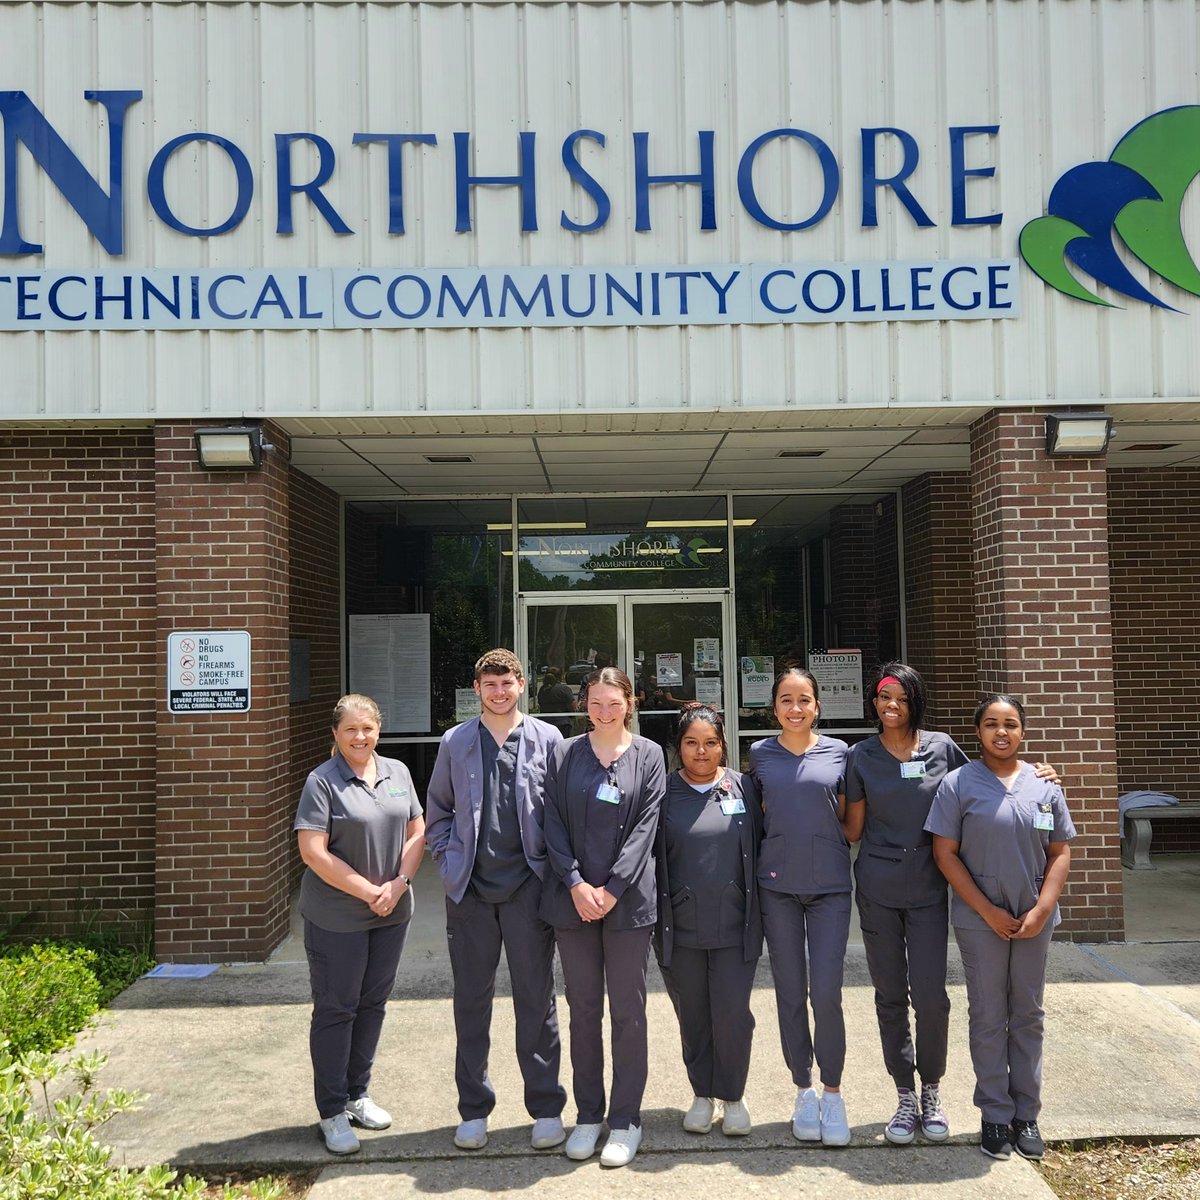 👏 Exciting Announcement! Our Dual Enrollment students are now Certified Nursing Assistants passing their Certification Exams and are now fully certified! Congratulations, CNA grads! #BuildingFutures🐊